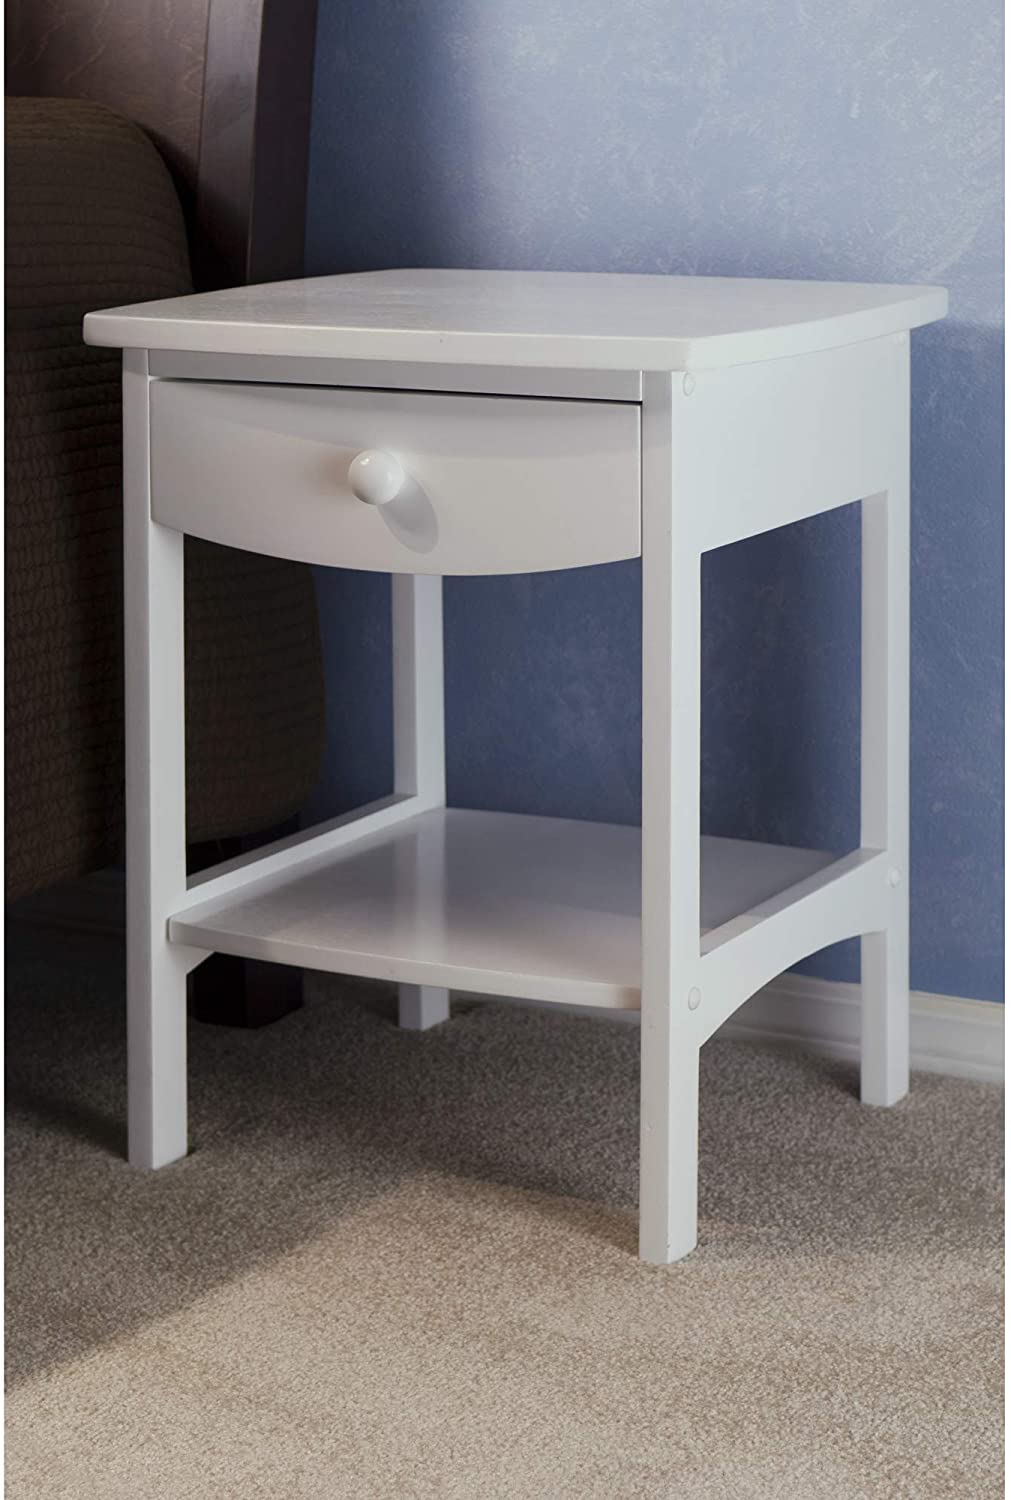 Side Tables: Wood Claire Accent Table, White